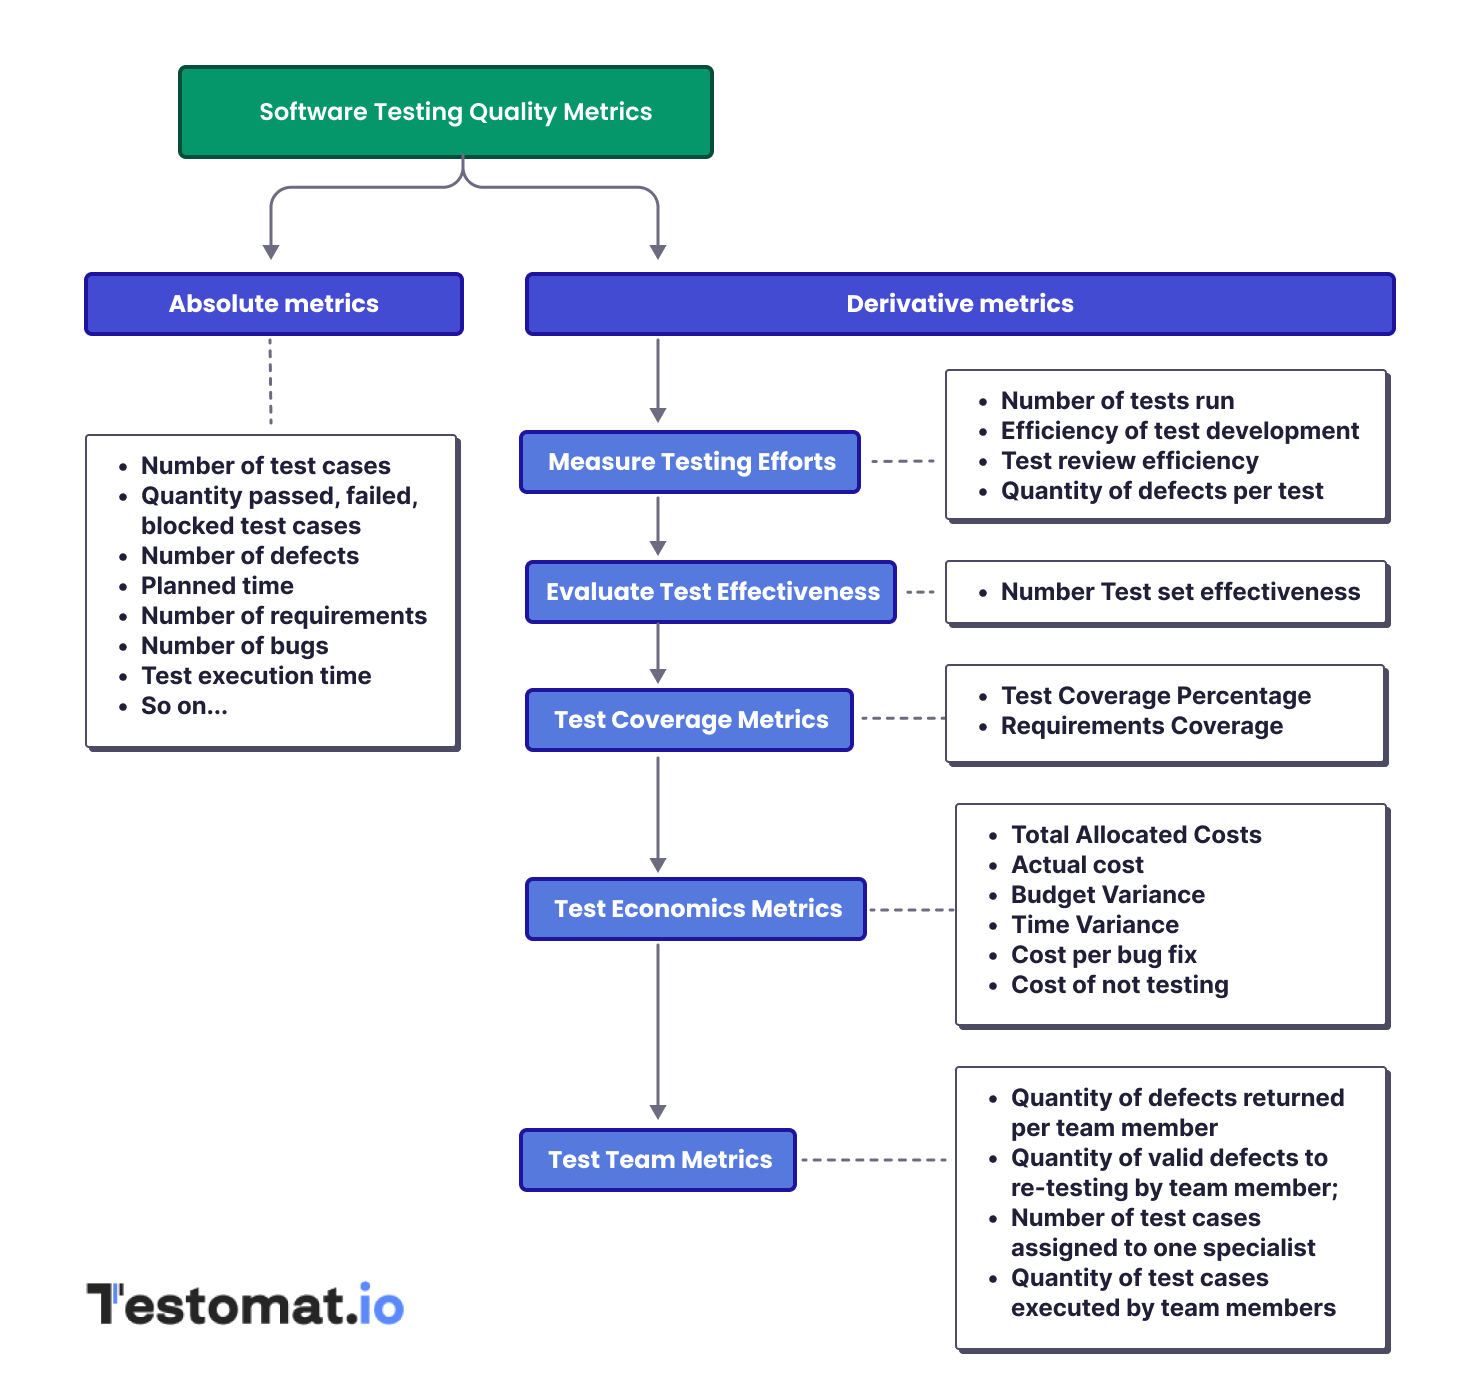 Table of Software Testing Quality Metrics